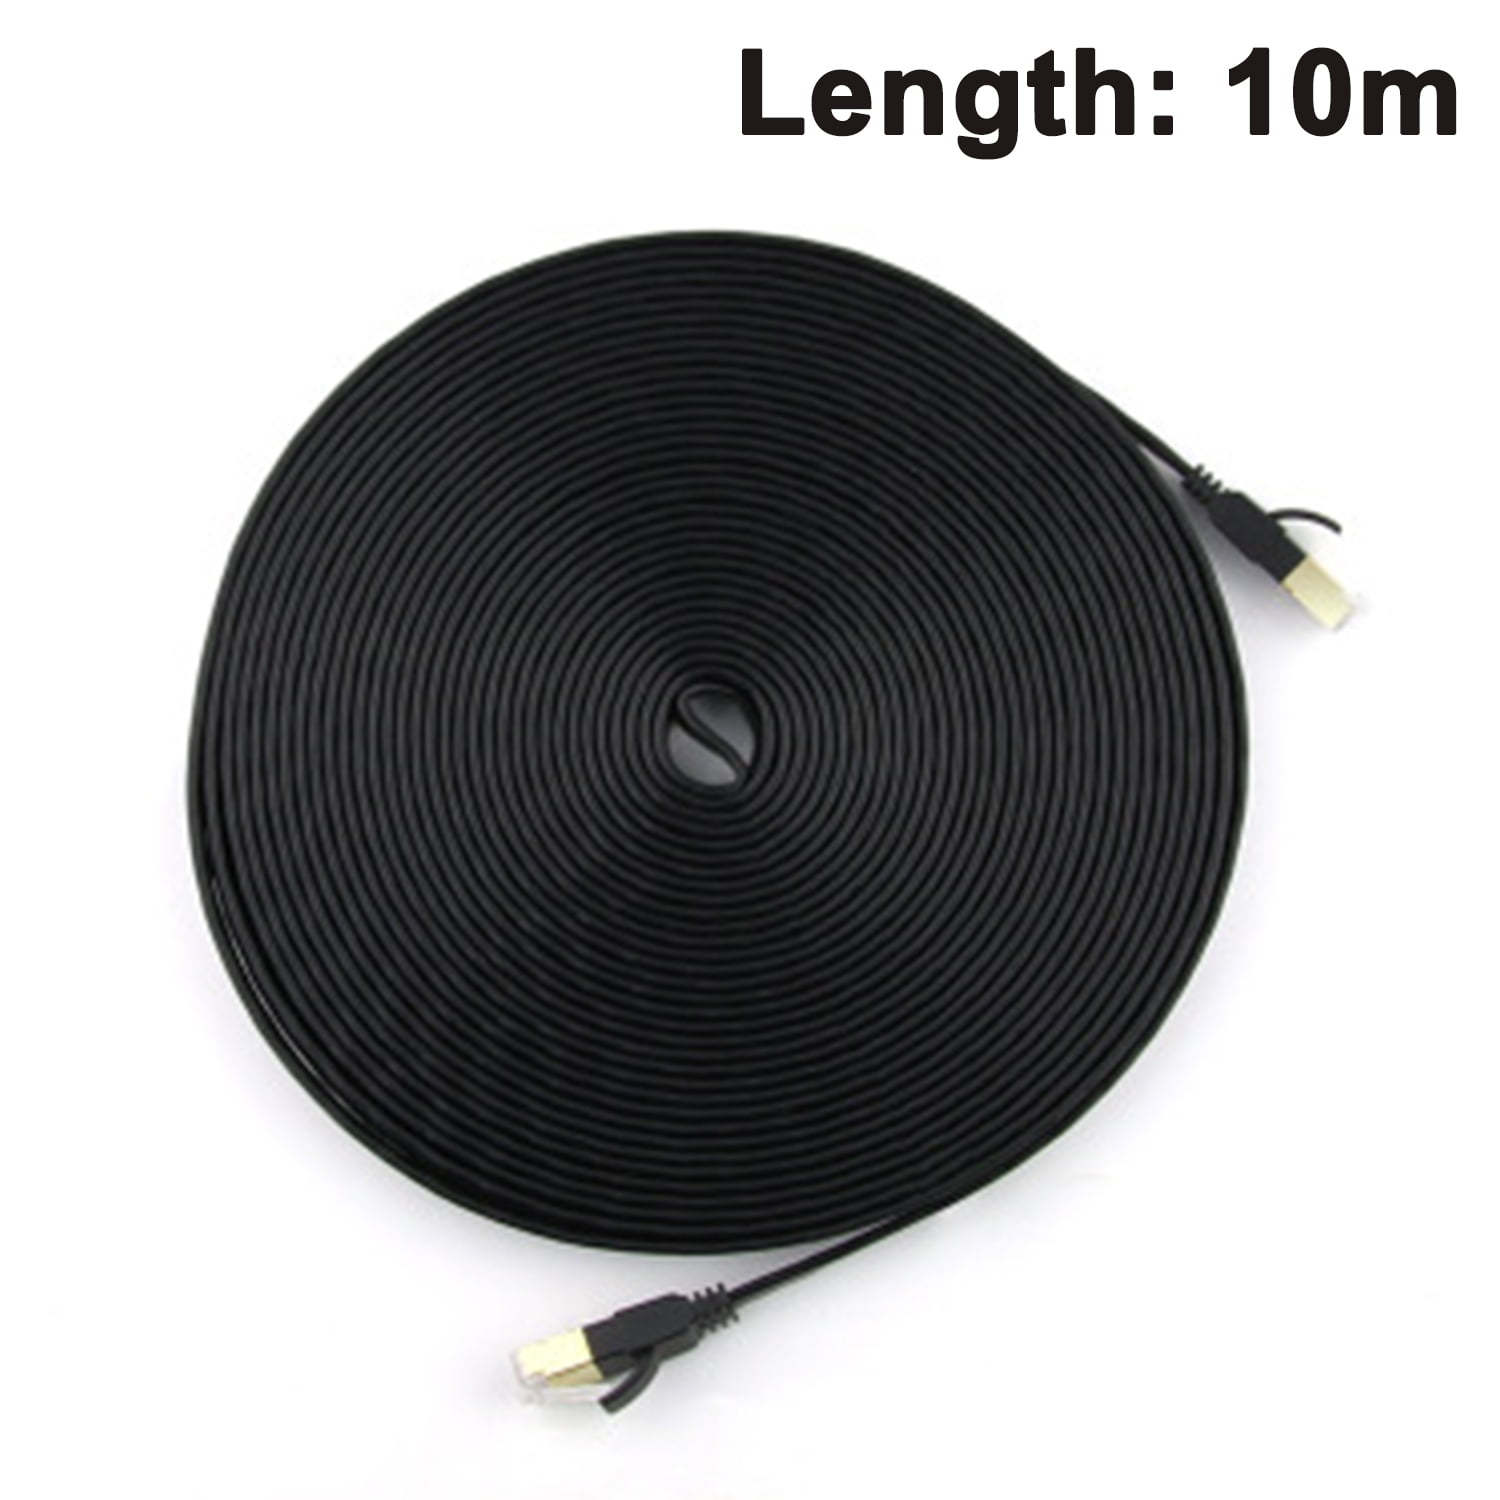 Cat 6 1000 Mbps Ethernet Cable 100 ft Faster Than Cat5e Cat5 Black Solid Cat6 Patch Cable High Speed Ultra Thin Gaming Internet Network Cable with RJ45 Snagless Connectors for Router & Modem 